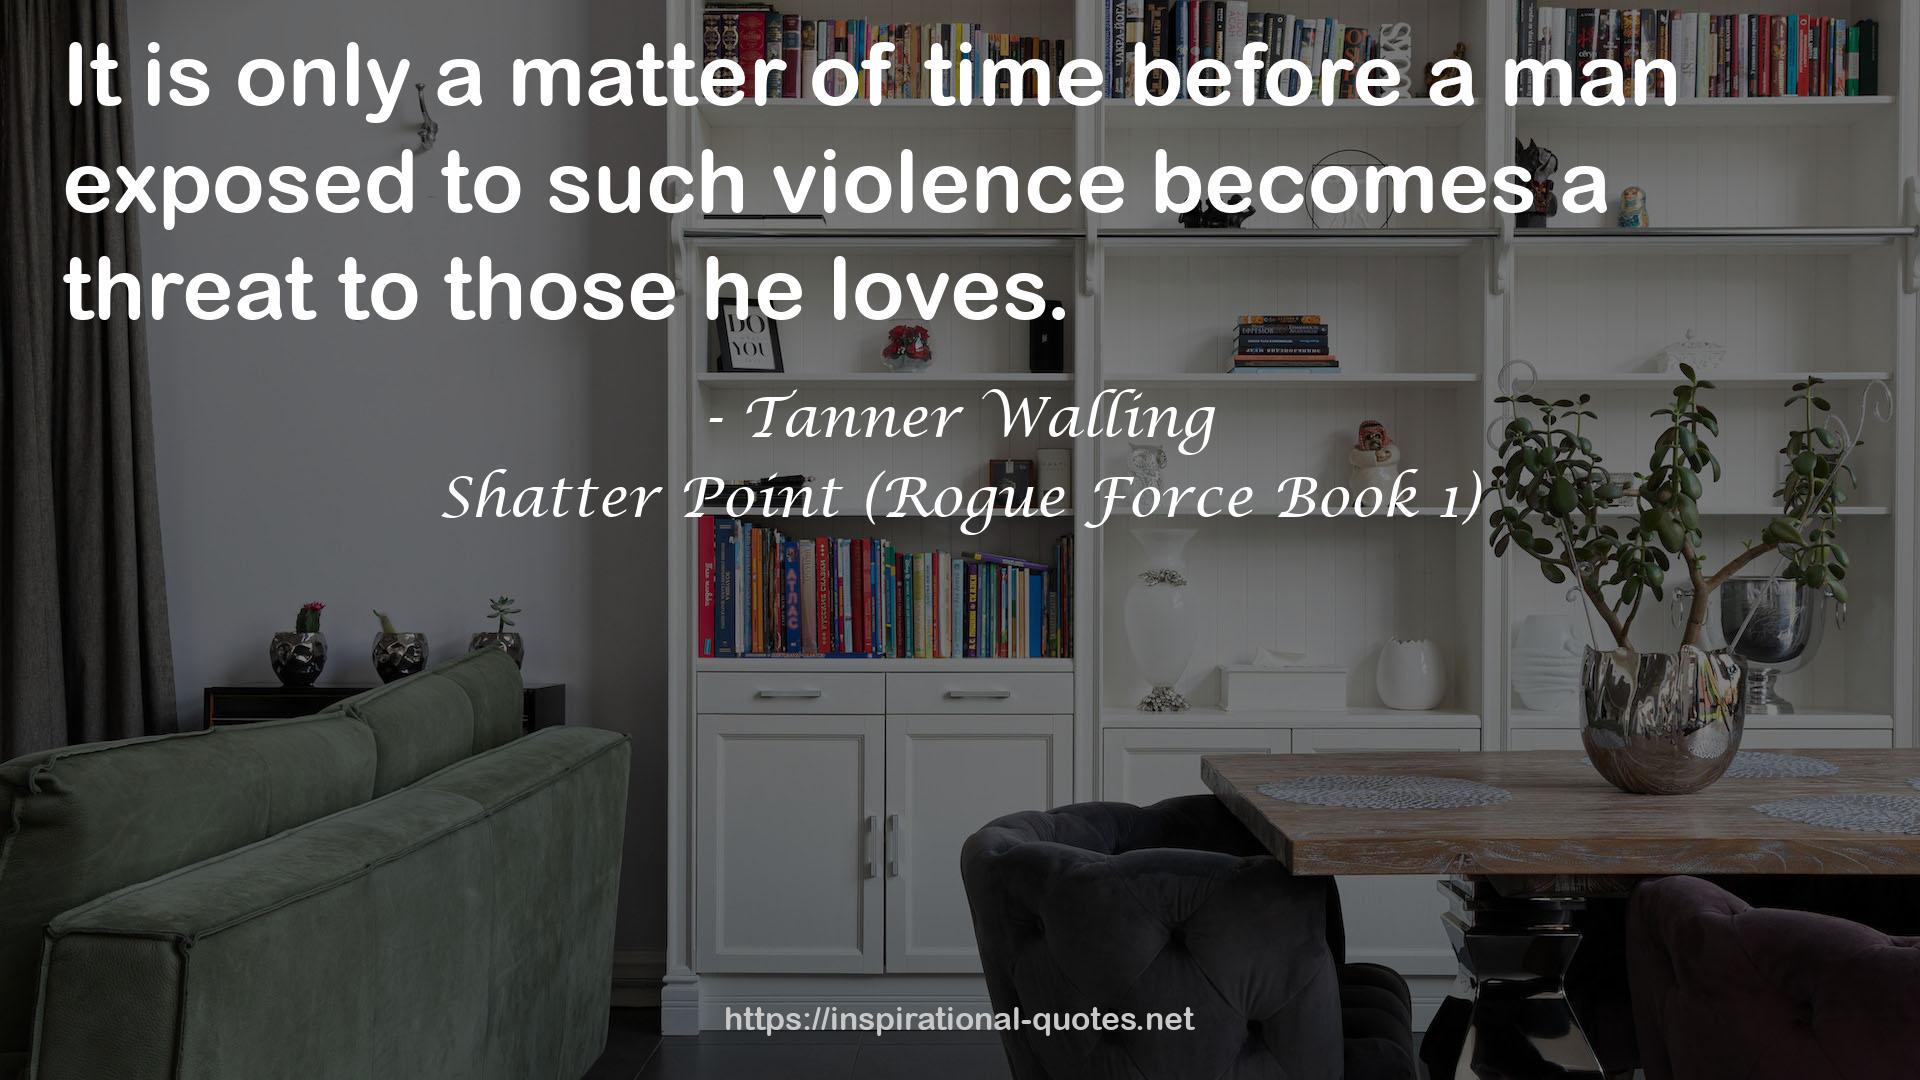 Shatter Point (Rogue Force Book 1) QUOTES